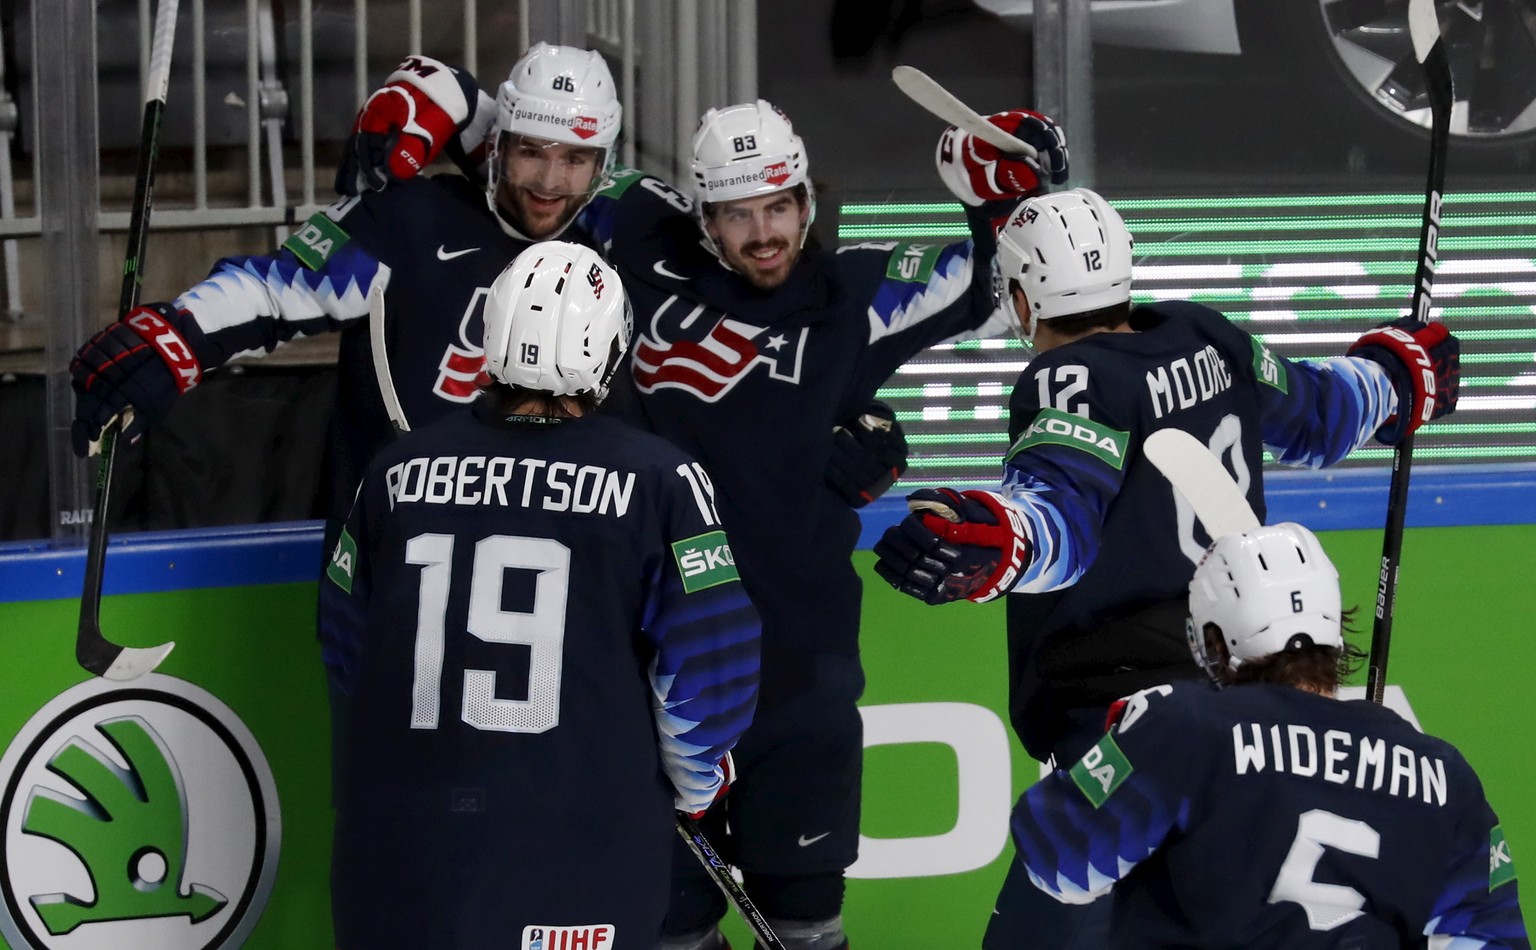 epa09250851 Players of USA celebrate a goal during the IIHF 2021 World Ice Hockey Championships bronze medal match between USA and Germany at the Arena Riga, Latvia, 06 June 2021. EPA/TOMS KALNINS